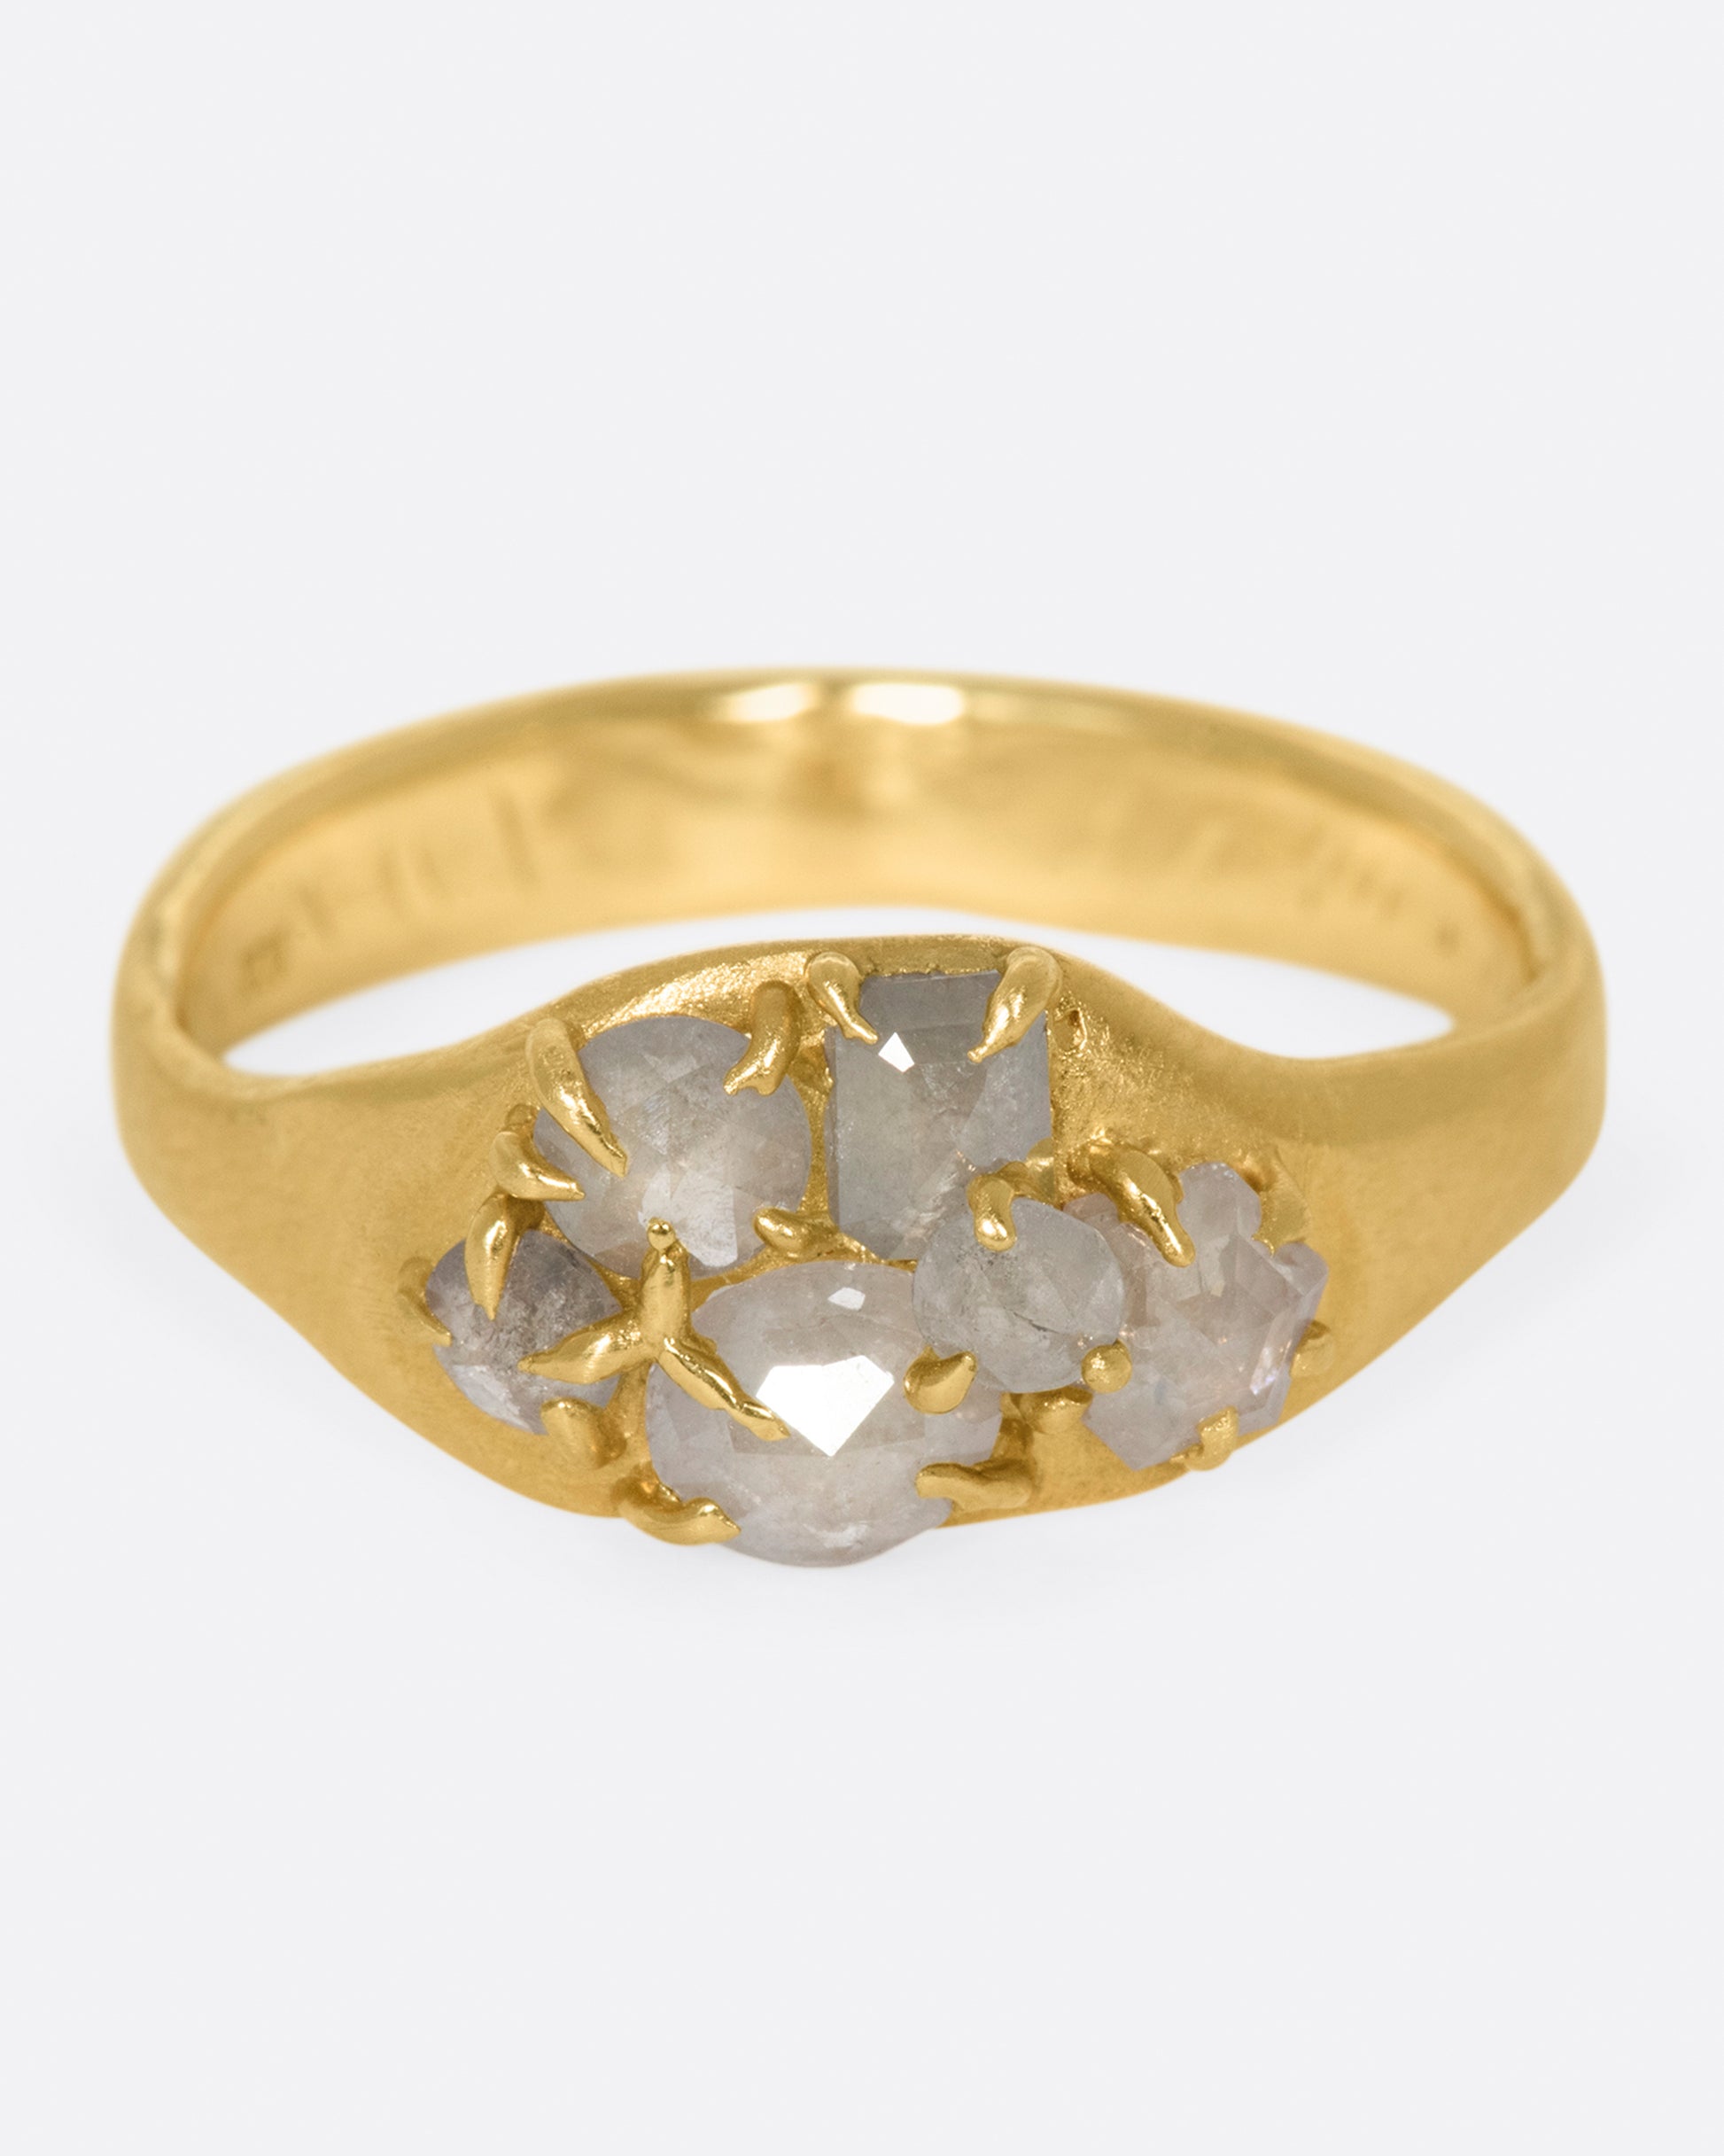 A yellow gold ring with a cluster of prong set gray diamonds on its face.